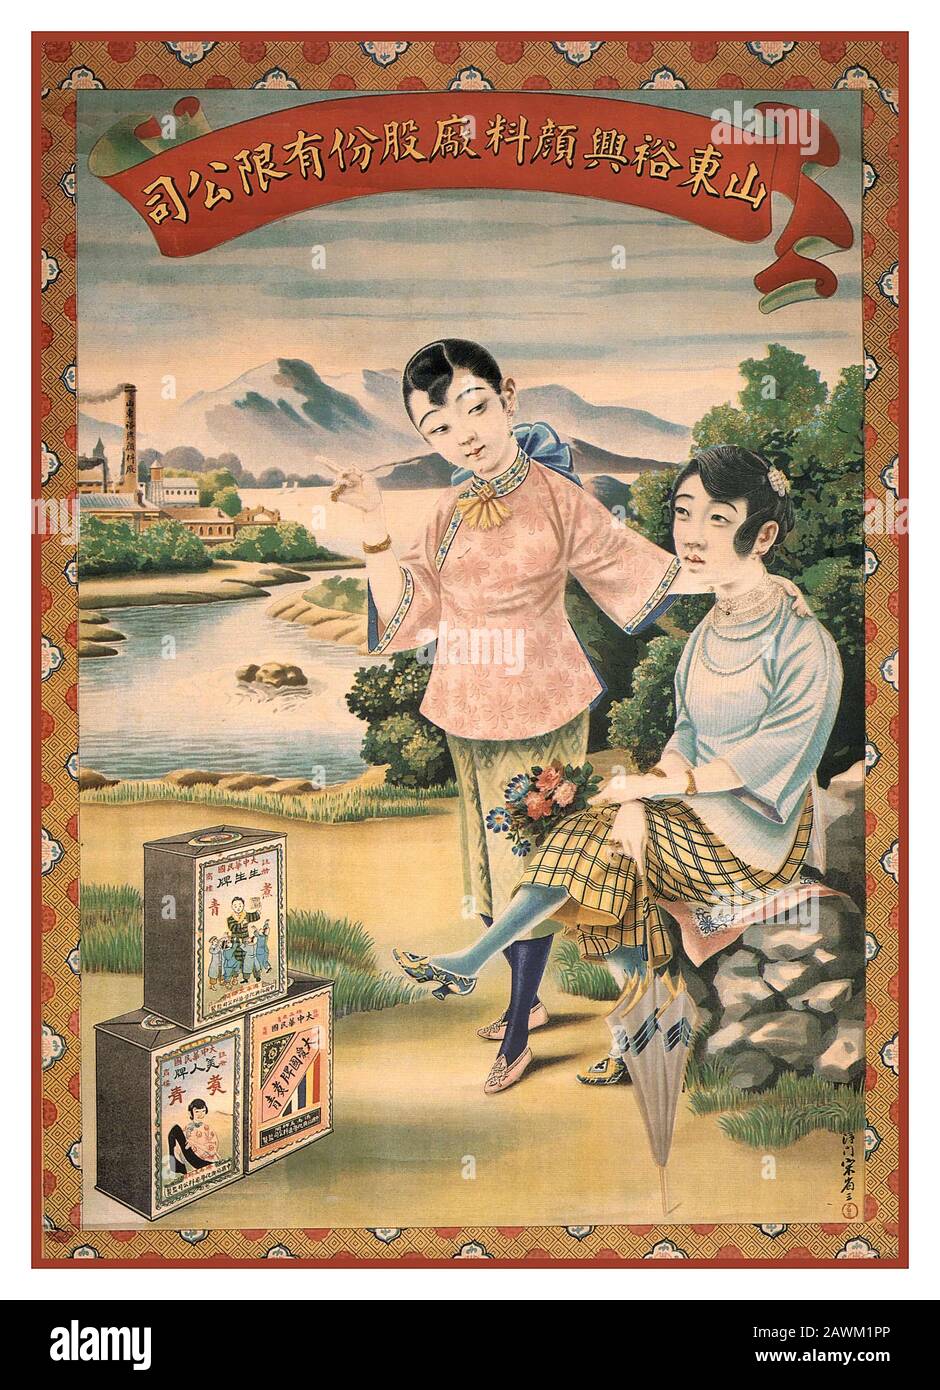 Vintage Chinese Shanghai Poster Chinese Advertising Artwork By Yu Xing Dye Factory Of Shandong Province Shanghai Chinese Posters Stock Photo Alamy Choose from over a million free vectors, clipart graphics, vector art images, design templates, and illustrations created by artists worldwide! https www alamy com vintage chinese shanghai poster chinese advertising artwork by yu xing dye factory of shandong province shanghai chinese posters image342803854 html